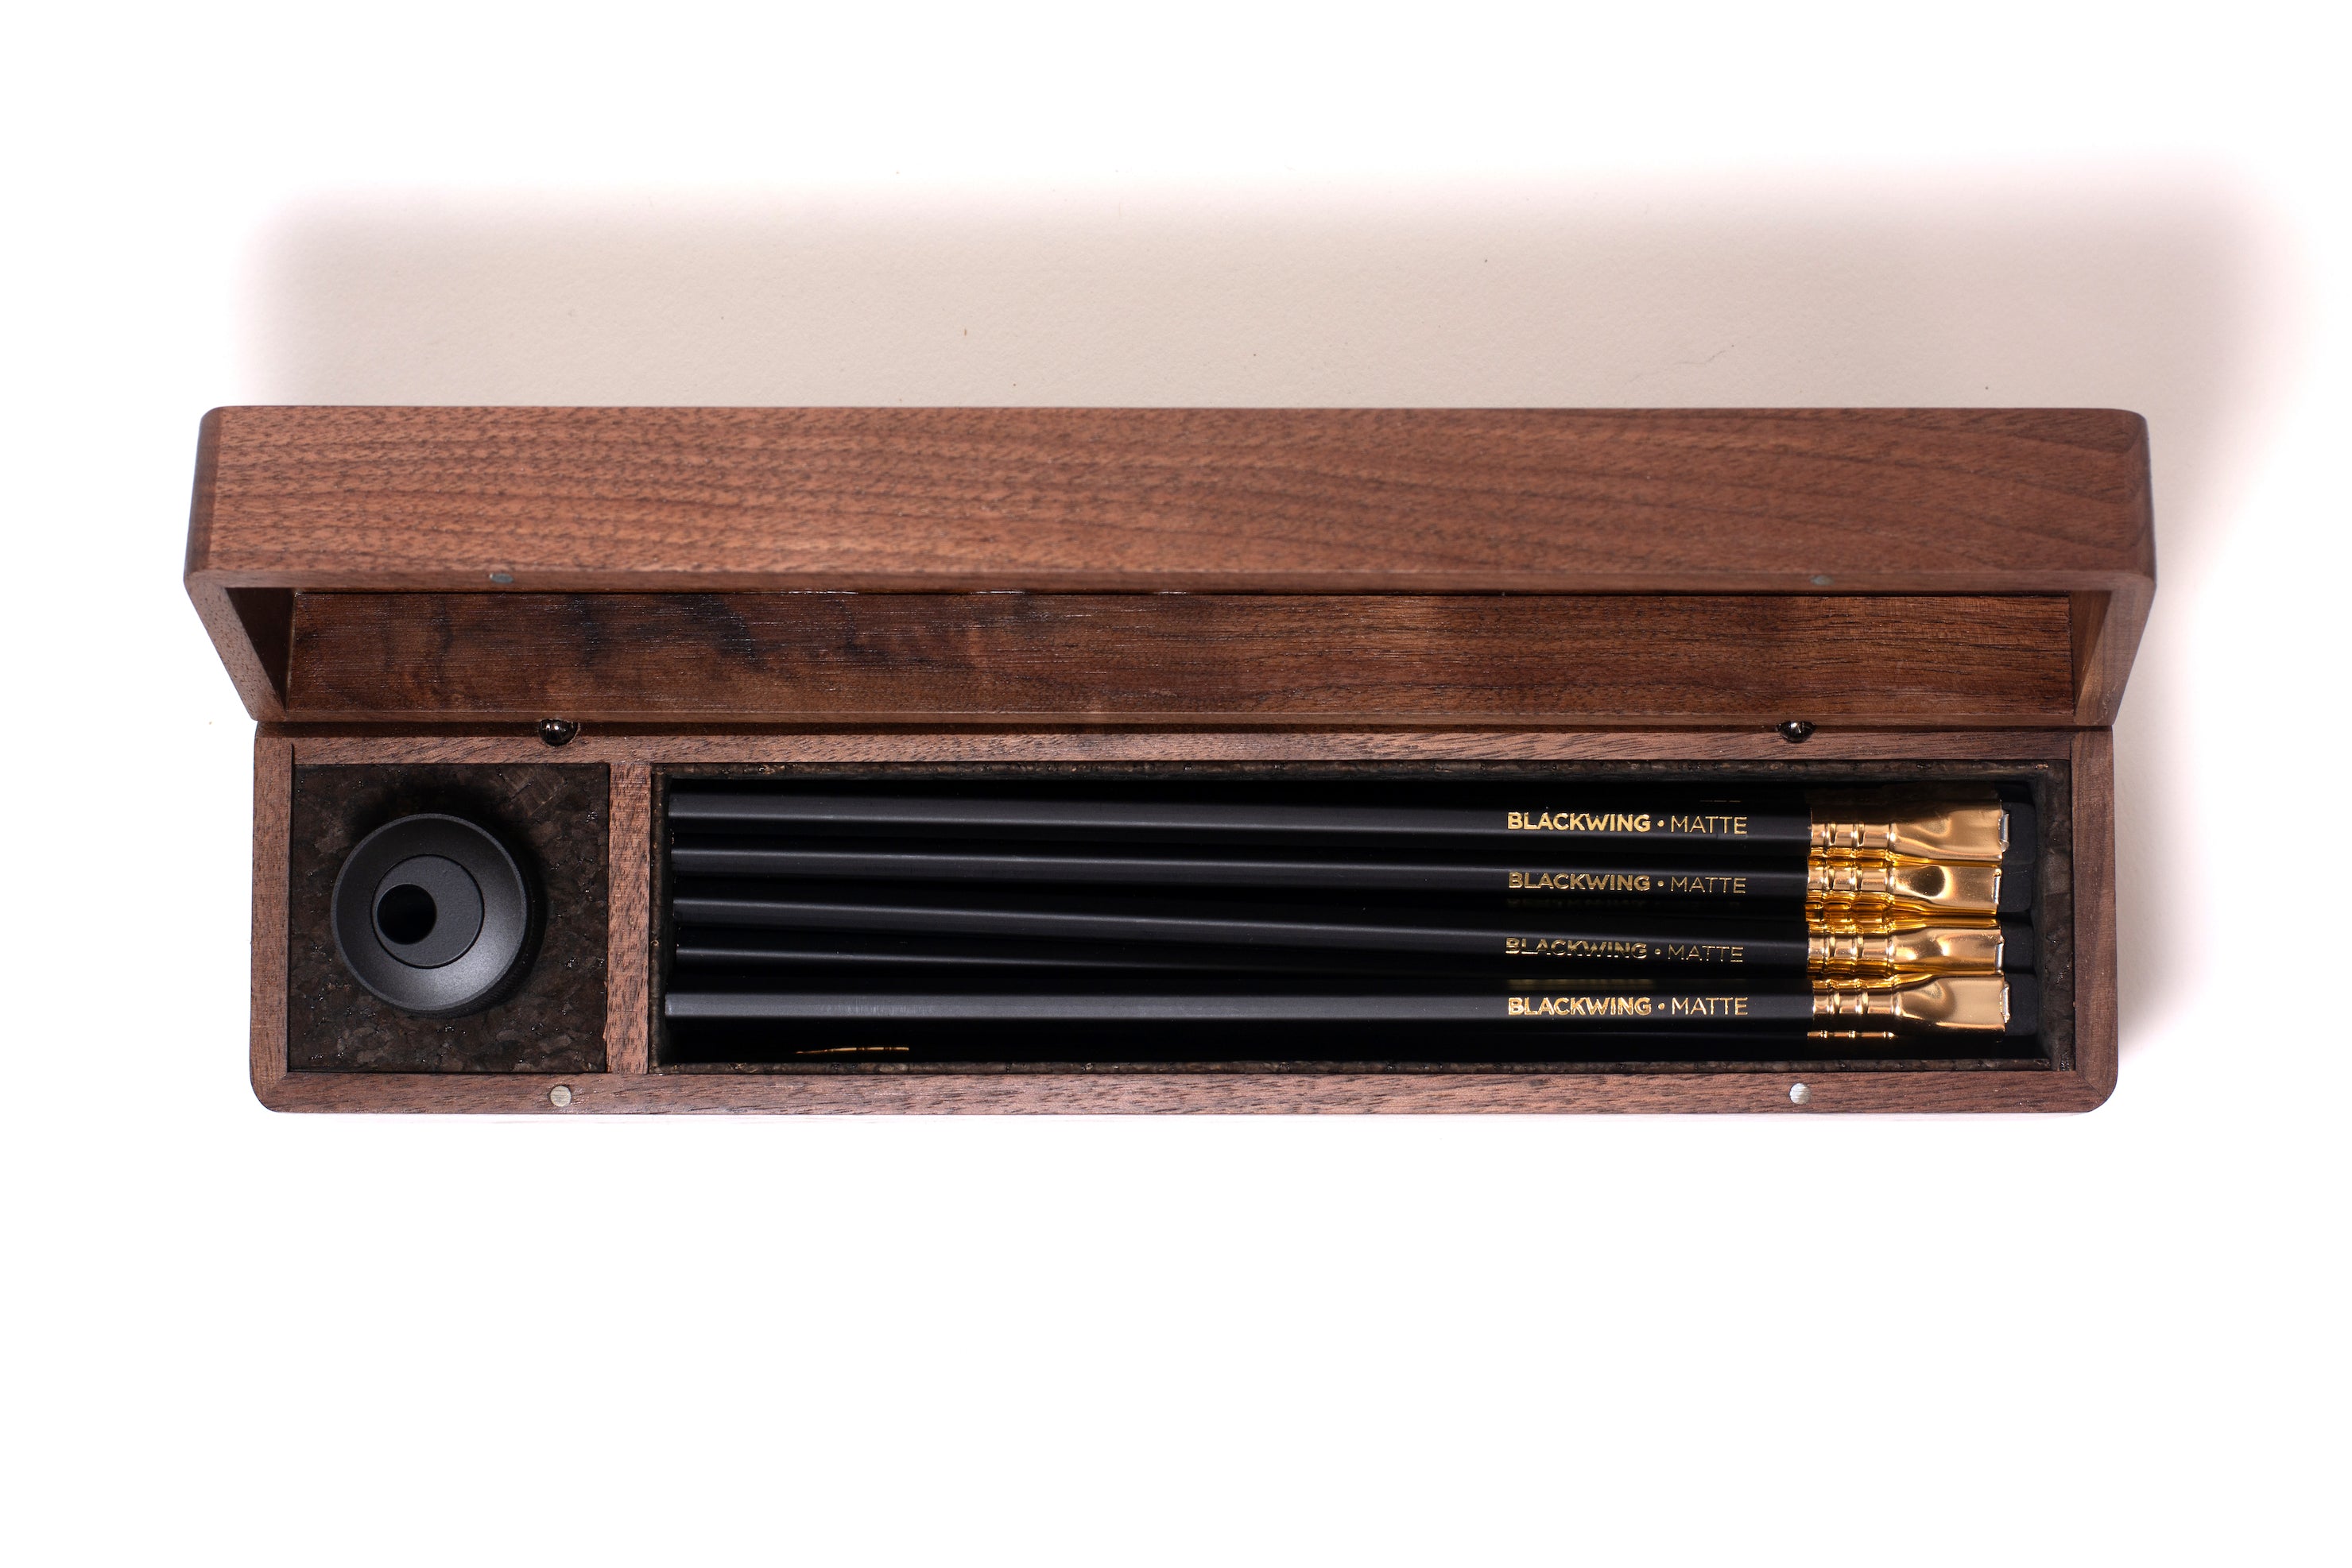 A Blackwing Walnut Box with a sharpener included.